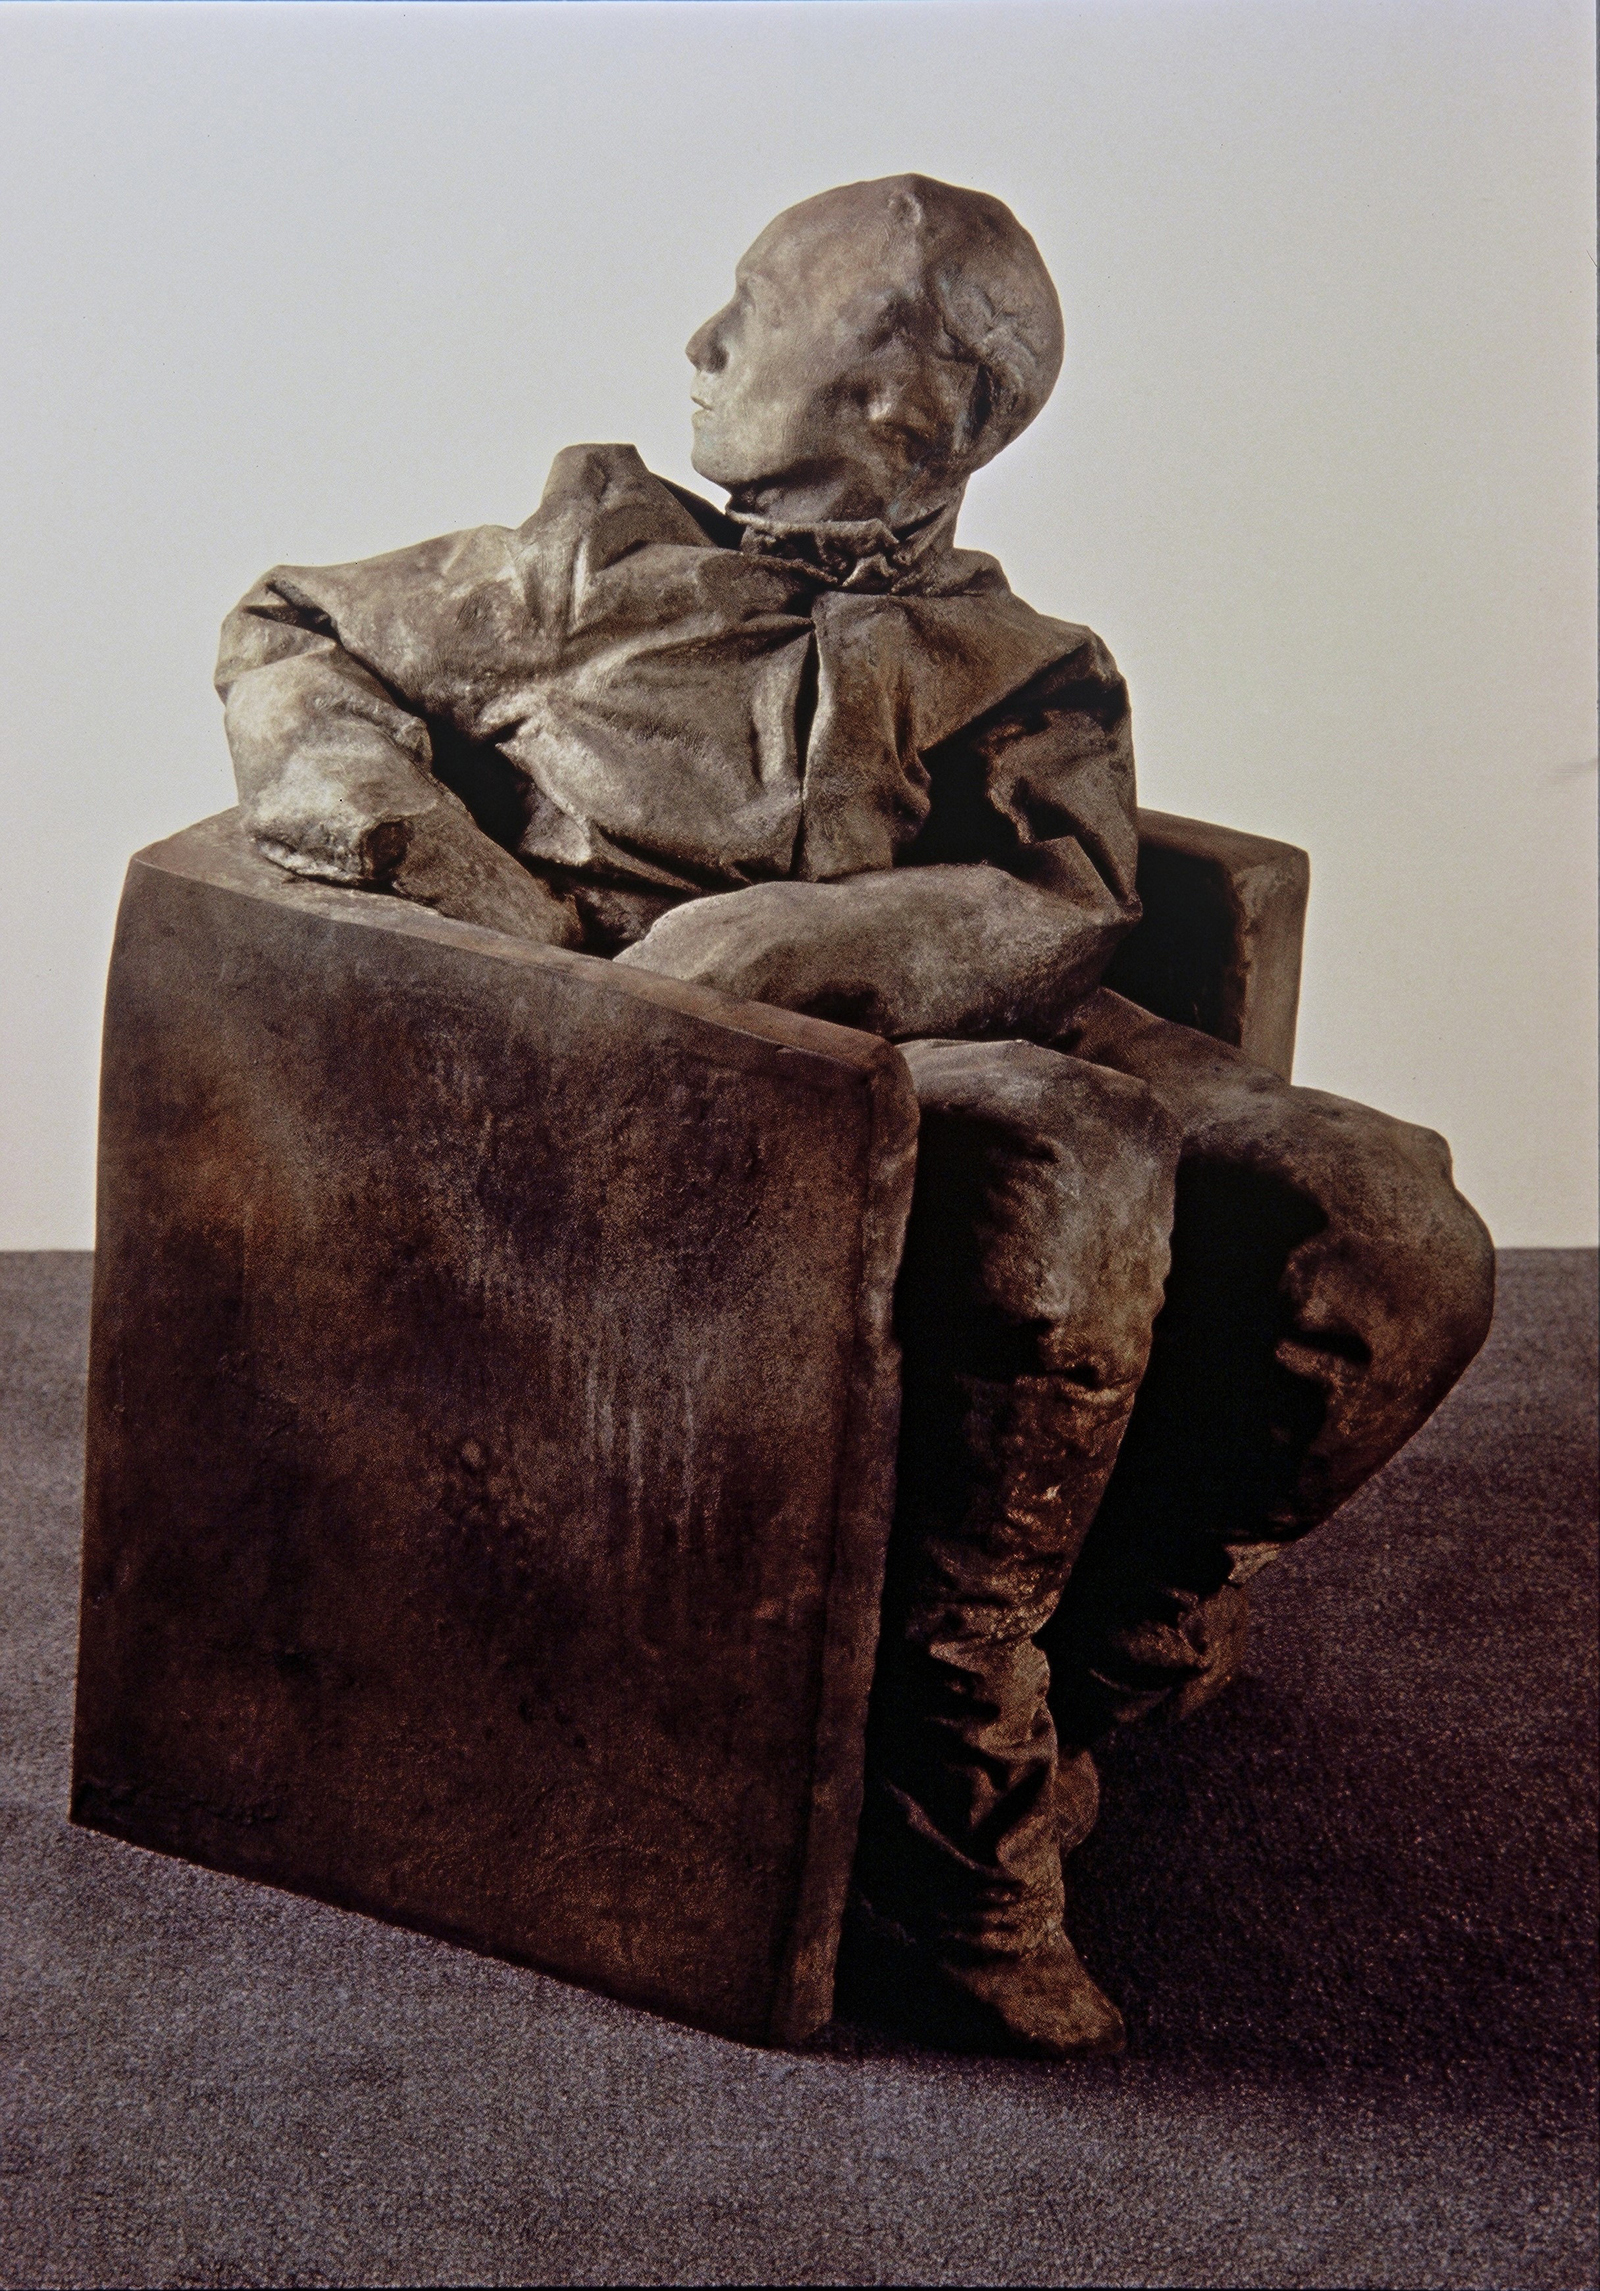 Juan Muñoz (Spanish, 1953-2001), Seated Figure Looking Backwards, 1996. Bronze. Meadows Museum, SMU, Dallas. Gift of The Barrett Collection, Dallas, Texas, in honor of Dr. Mark A. Roglán, MM.2014.06. Photo courtesy of The Barrett Collection